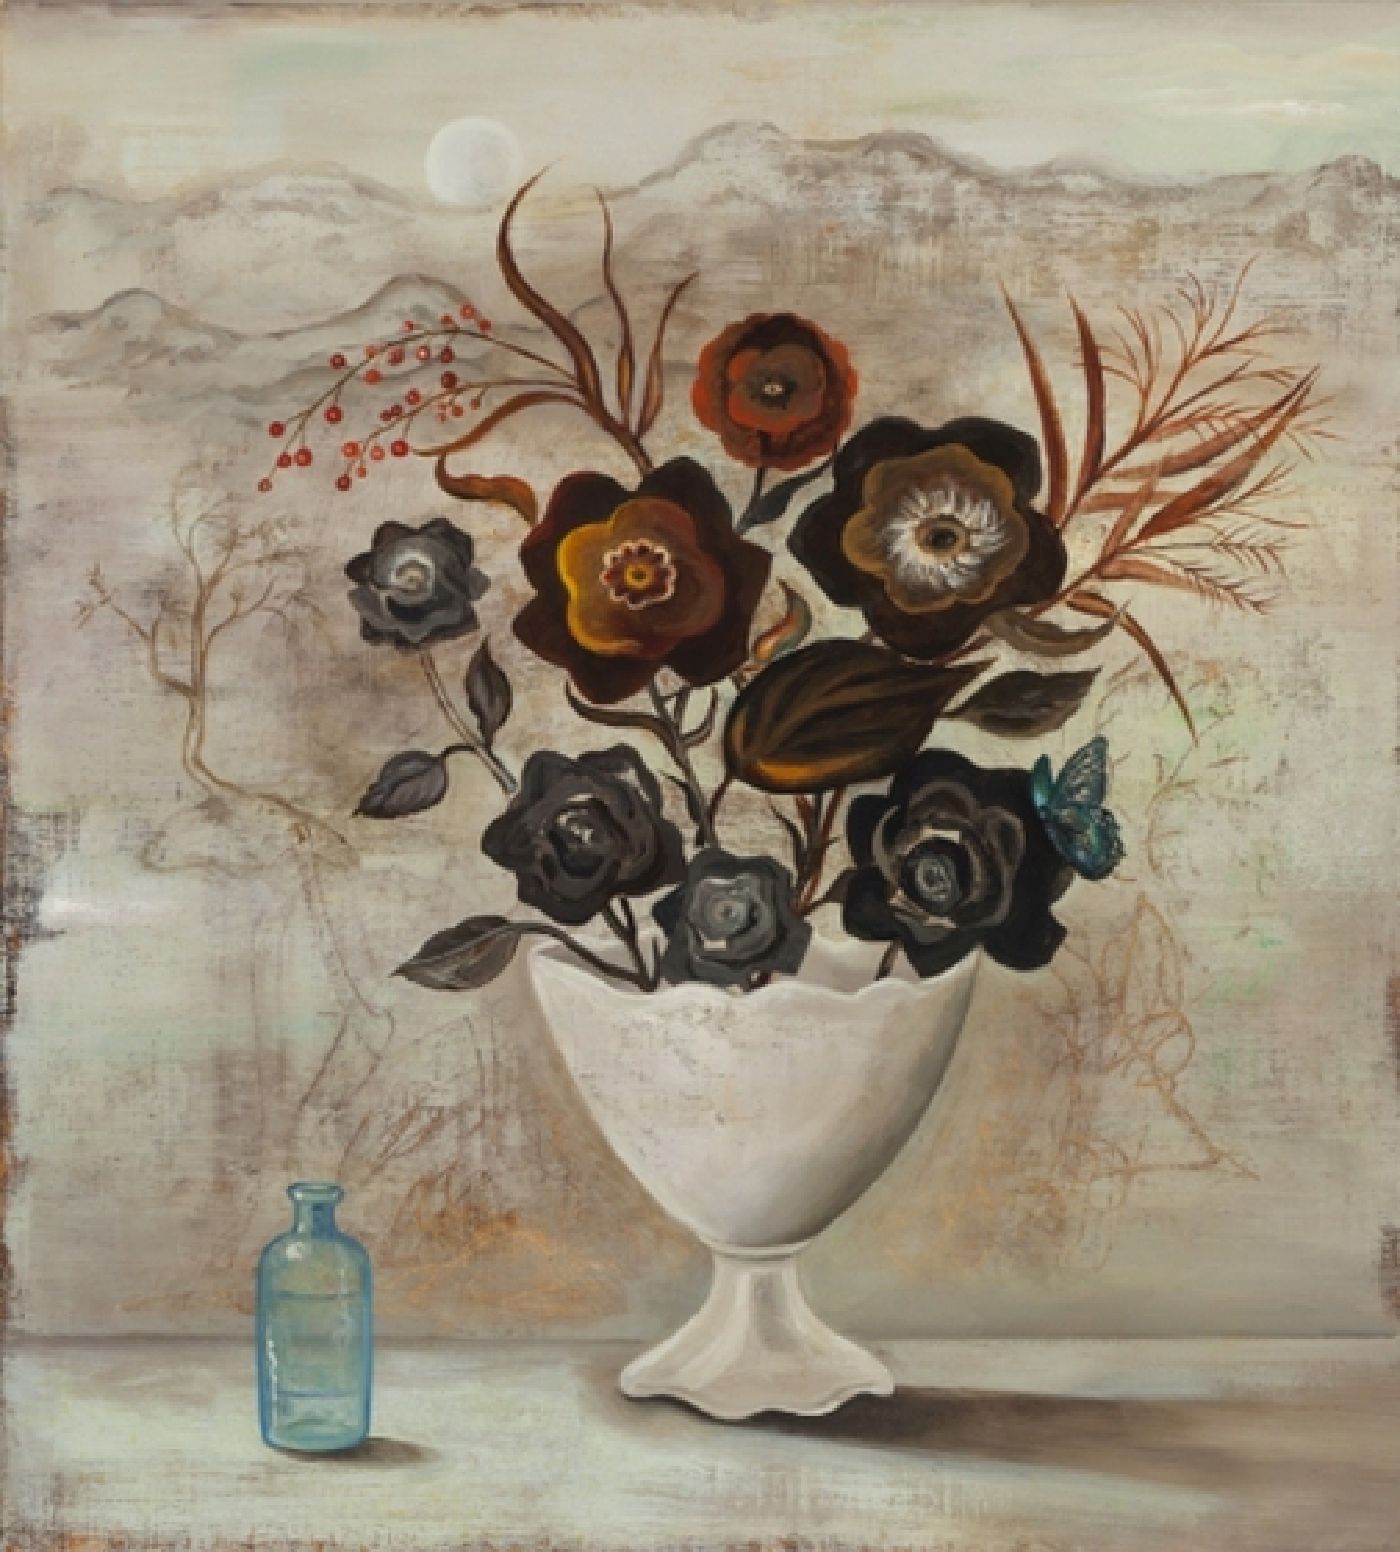 The Alchemist's Roses - oil on linen, 32 x 29 inches, 2015 